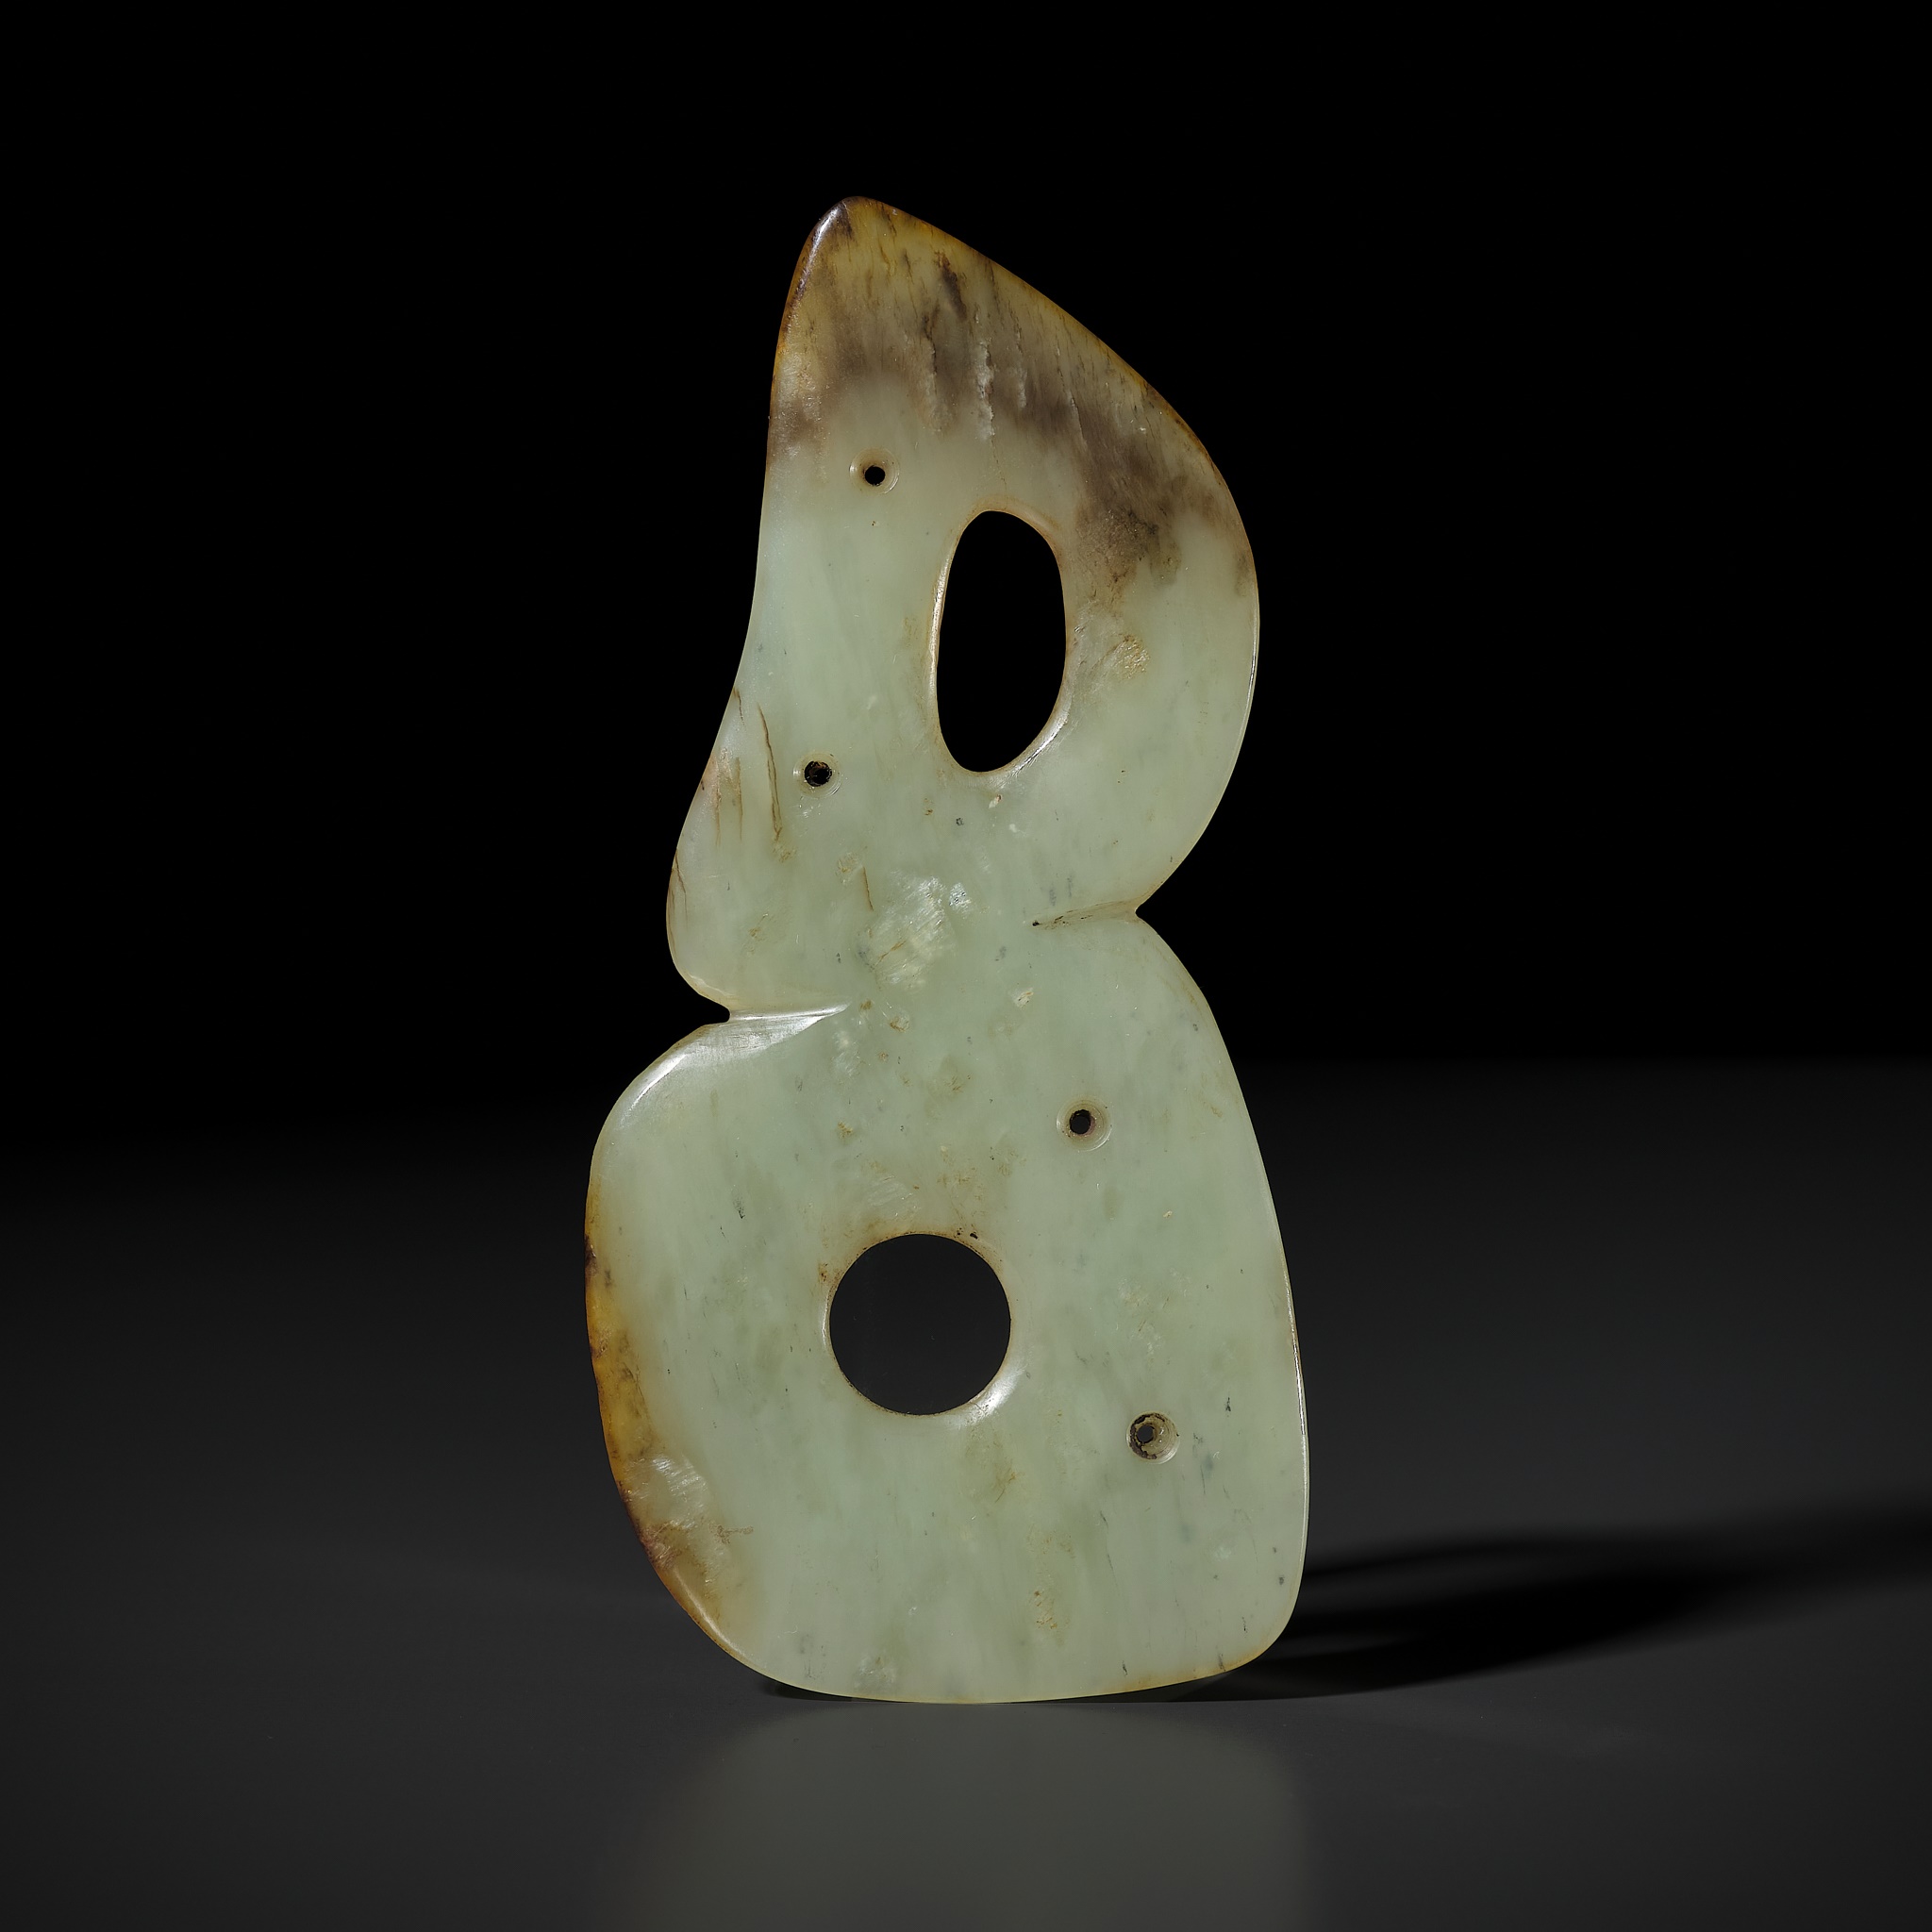 A PALE YELLOW JADE DOUBLE-HOLE ORNAMENT PLAQUE, HONGSHAN CULTURE